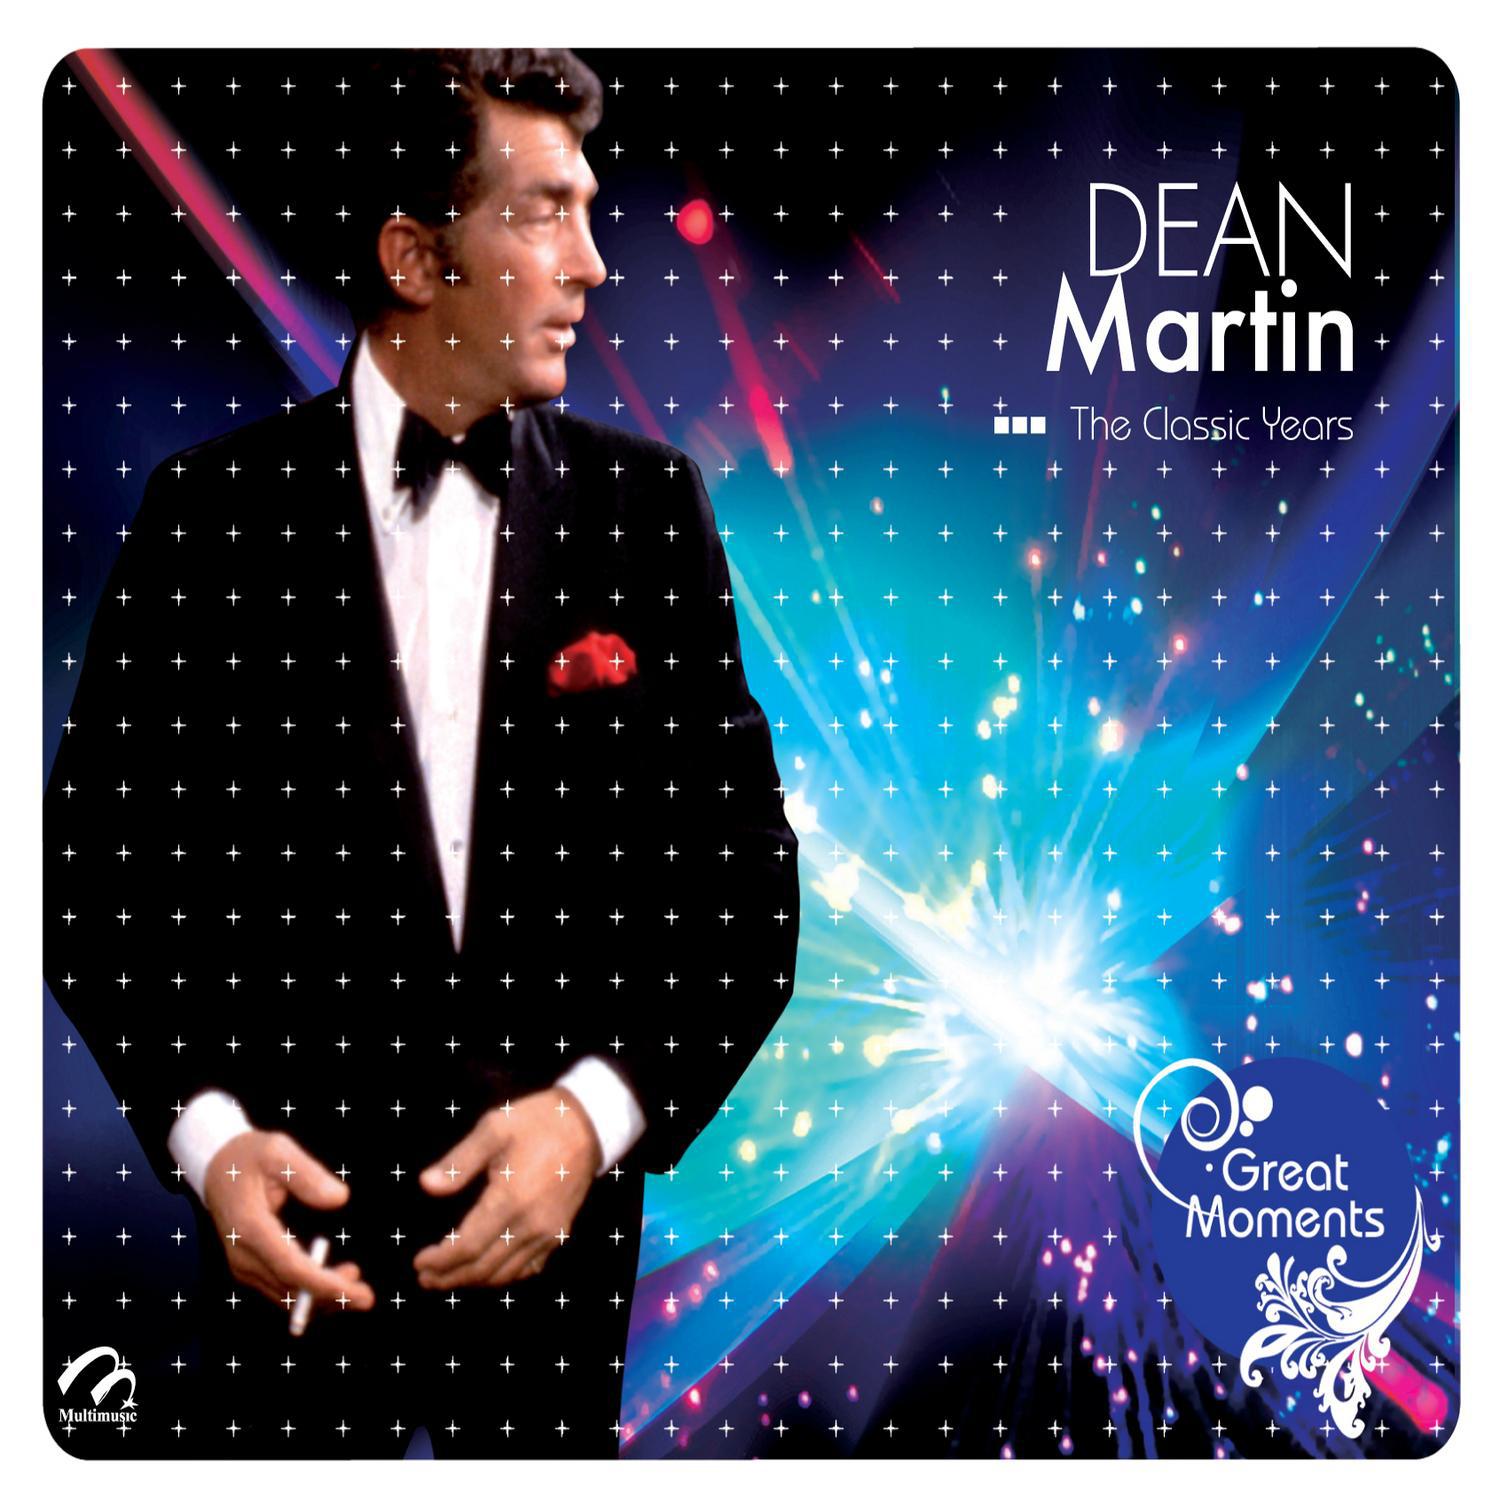 Dean Martin the Classic Years